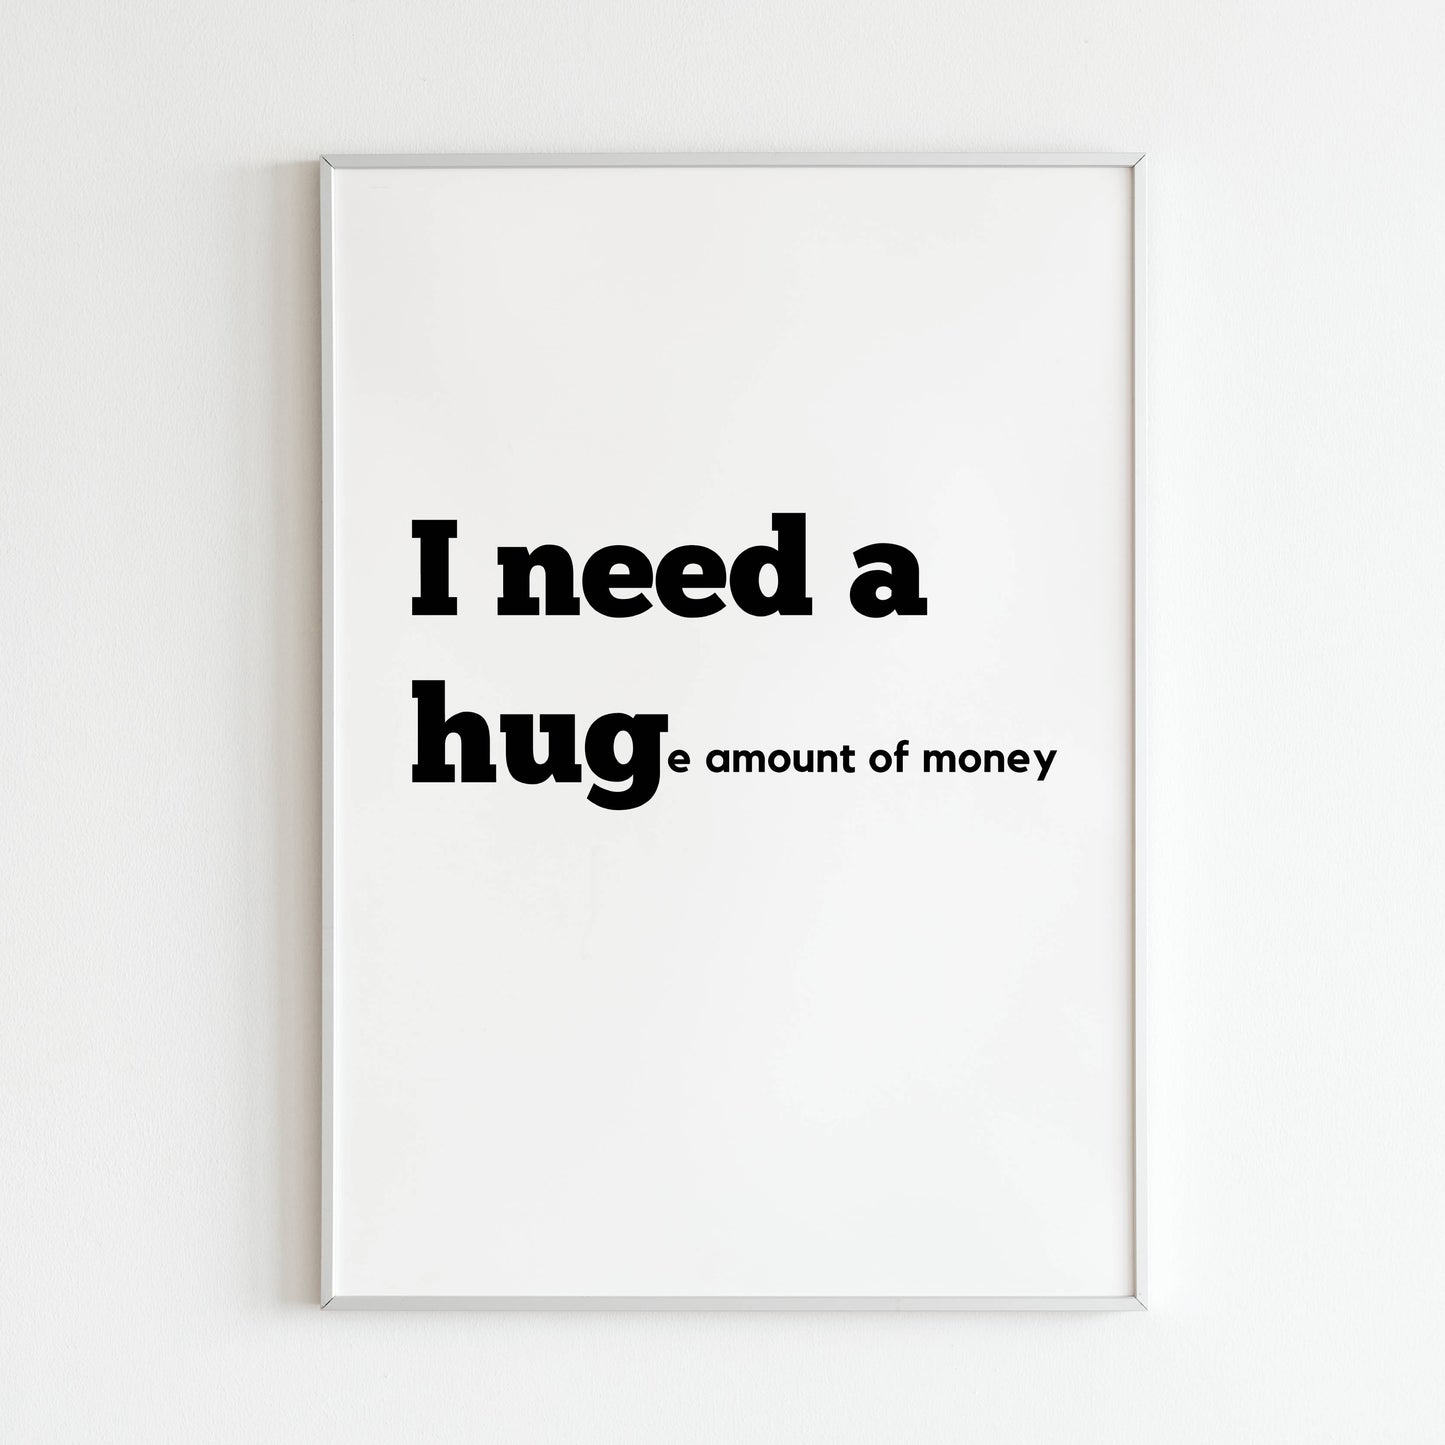 Downloadable "I need a huge amount of money" art print, express your financial aspirations with a touch of humor.